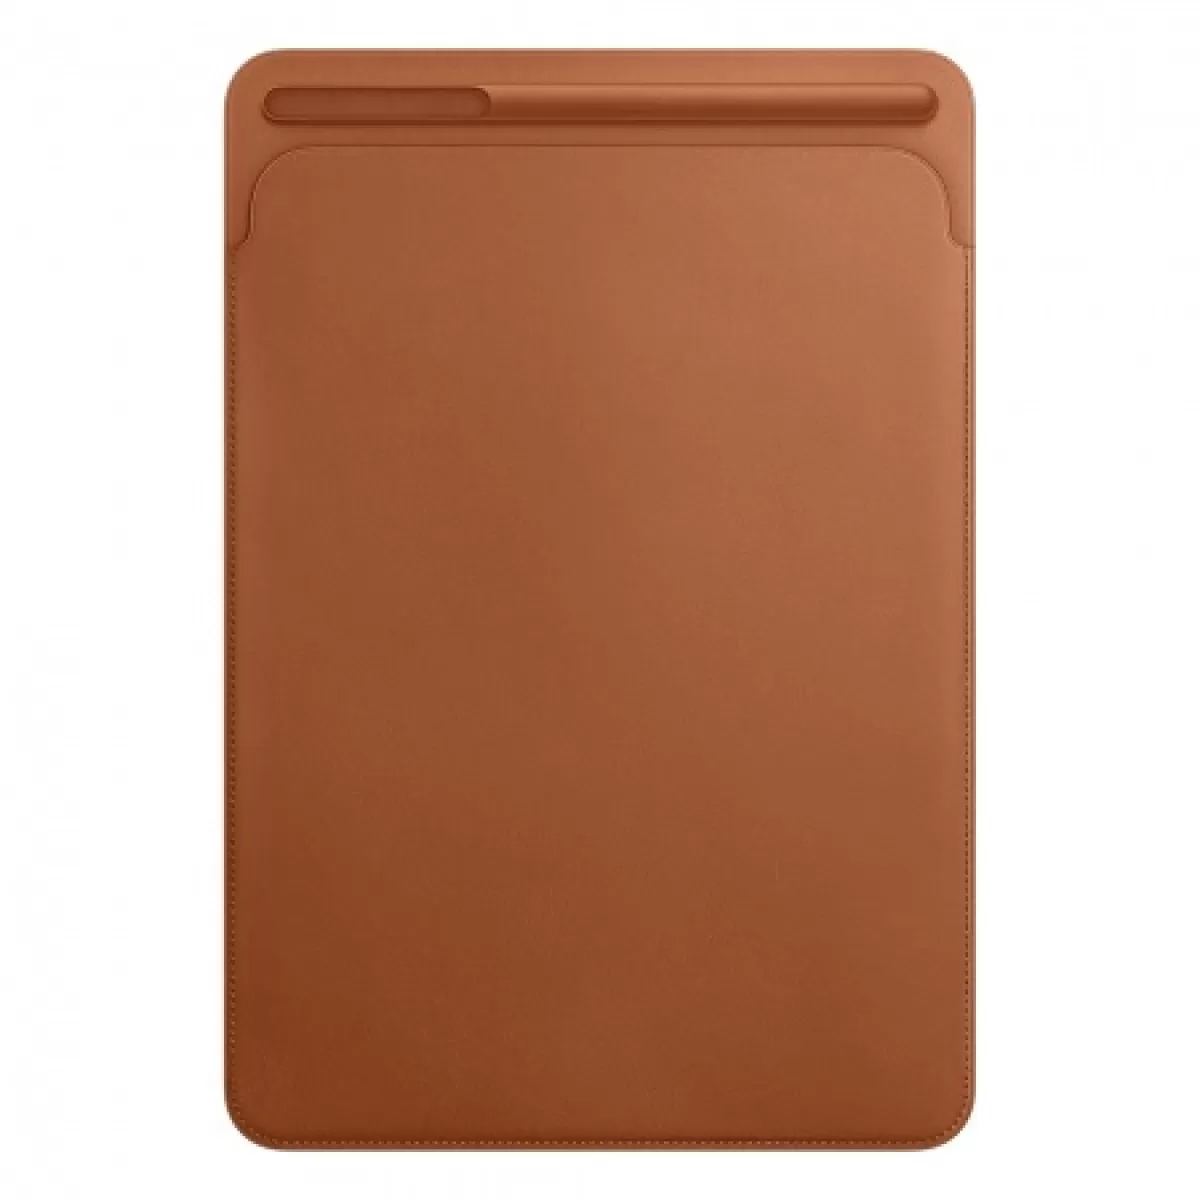 Apple Leather Sleeve for 10.5inch iPad Pro Saddle Brown